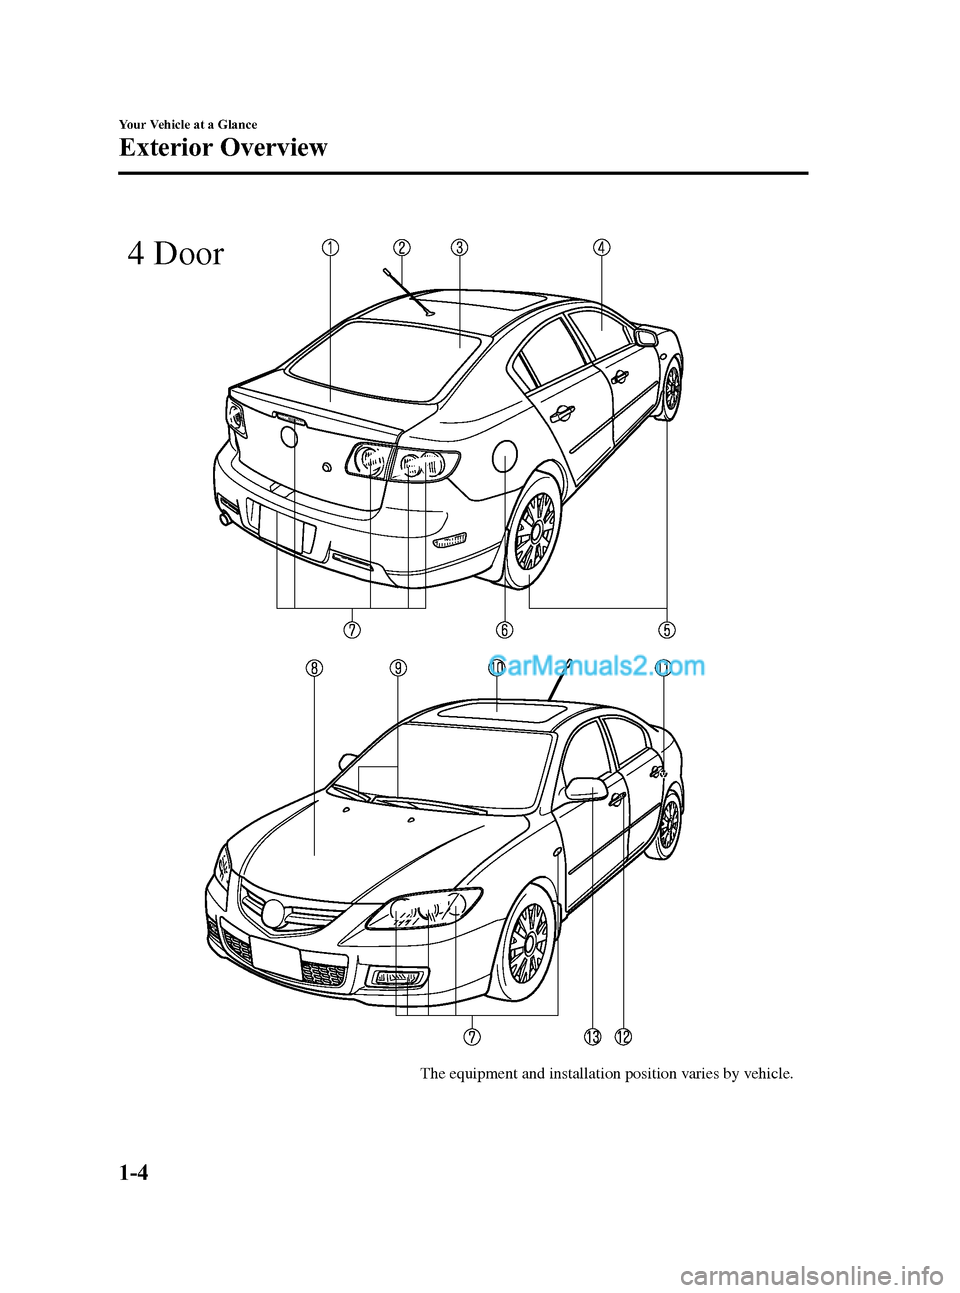 MAZDA MODEL MAZDASPEED 3 2007  Owners Manual (in English) Black plate (10,1)
The equipment and installation position varies by vehicle.
4 Door
1-4
Your Vehicle at a Glance
Exterior Overview
Mazda3_8V66-EA-06F_Edition3 Page10
Wednesday, August 23 2006 11:18 A